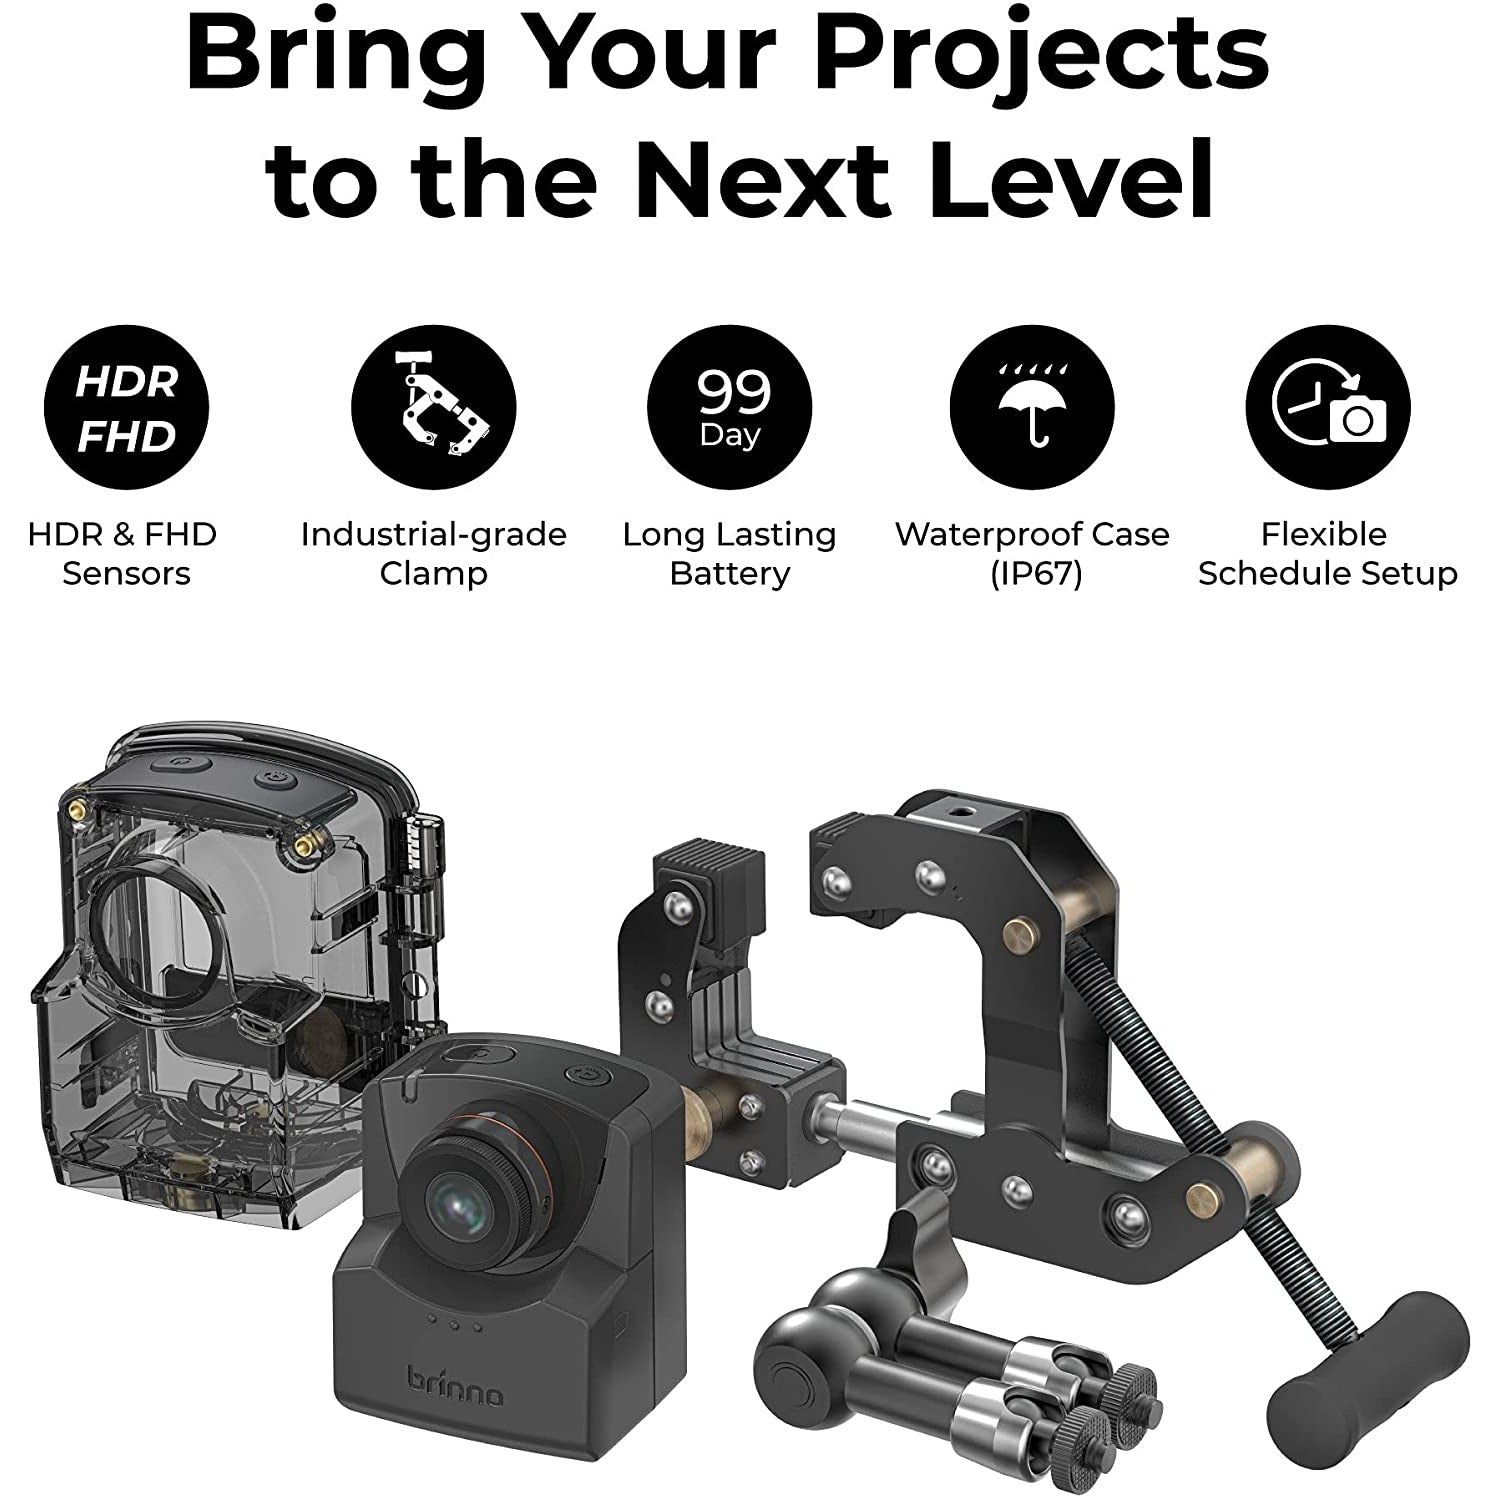 Brinno TLC2020C Time Lapse Camera with Housing & Clamp Bundle - 2 Pack